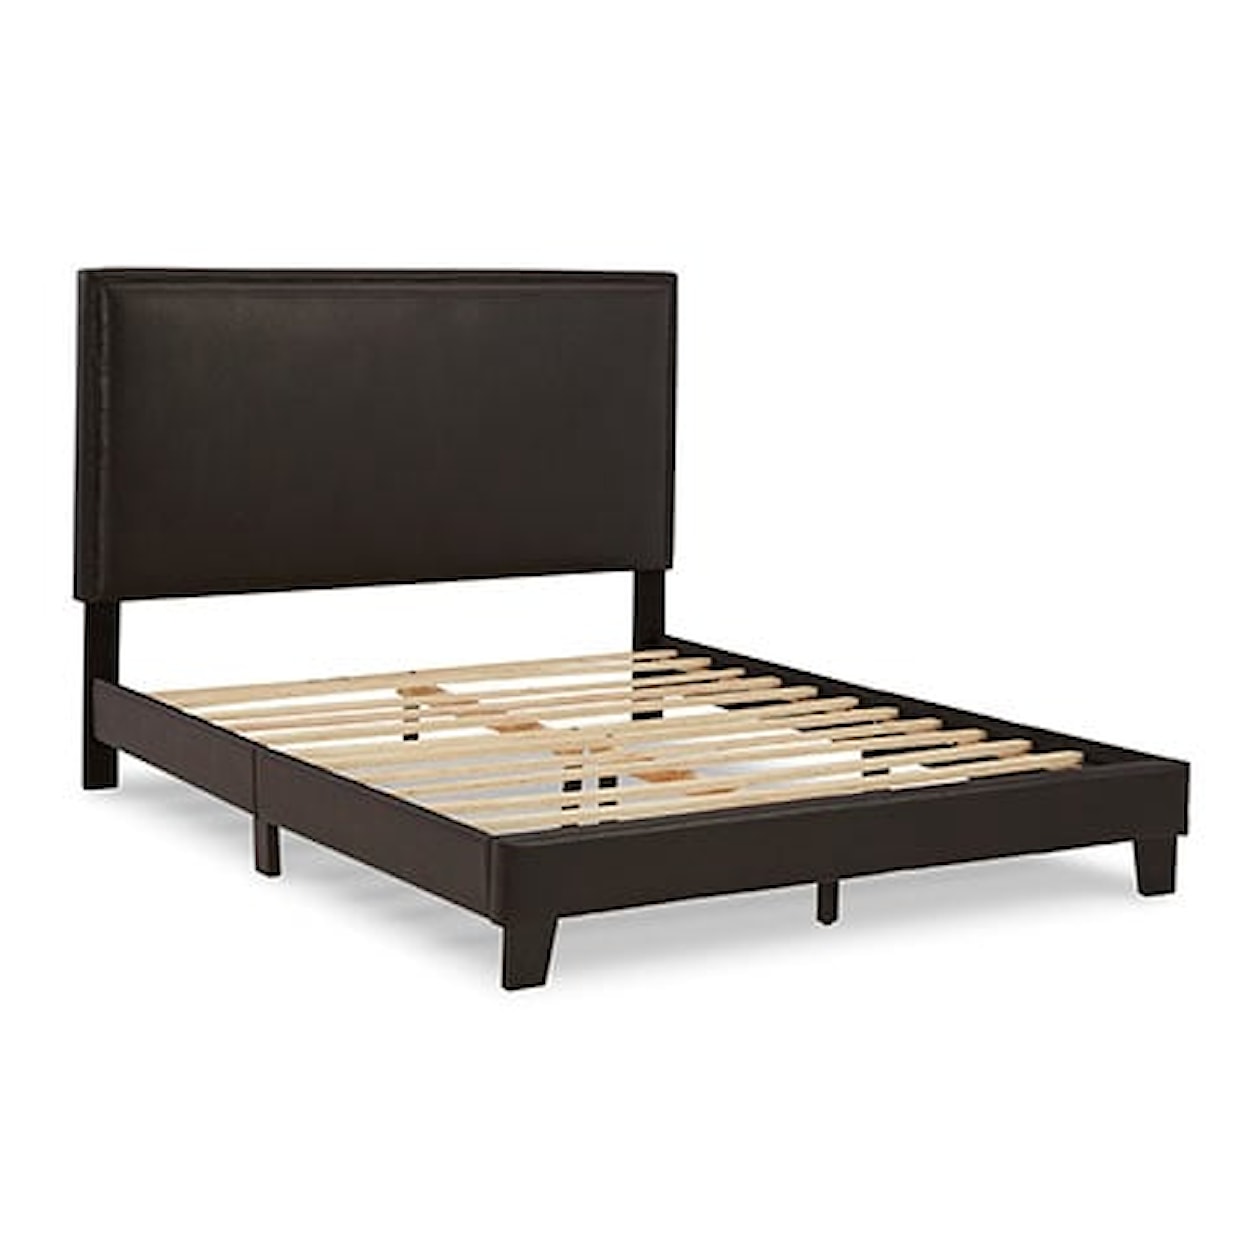 Signature Mesling Queen Upholstered Bed